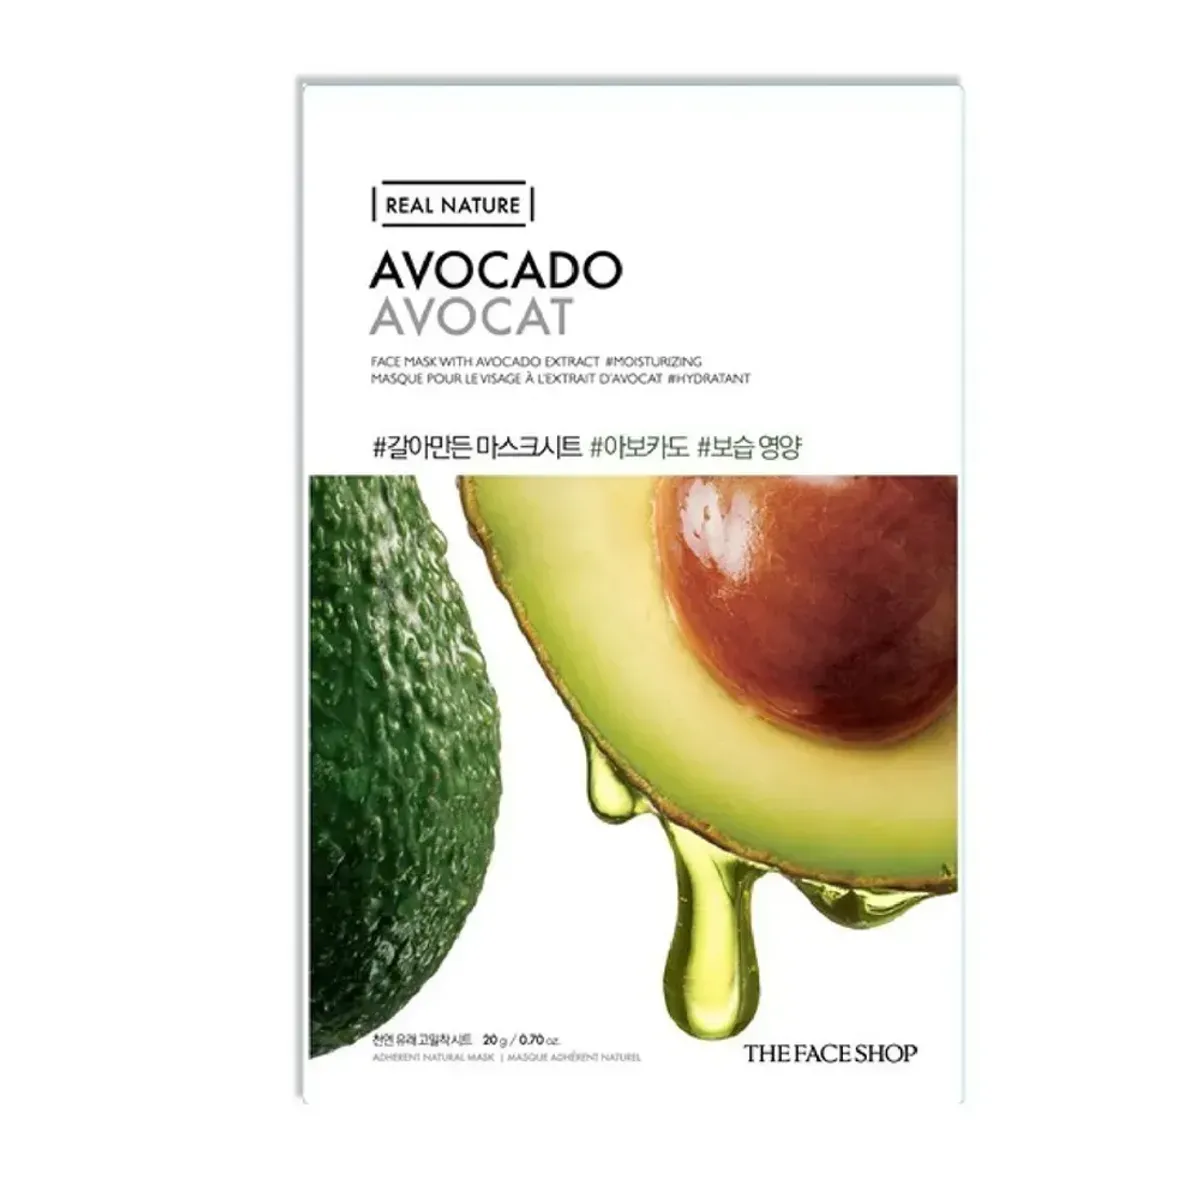 thefaceshop-real-nature-avocado-face-mask-6